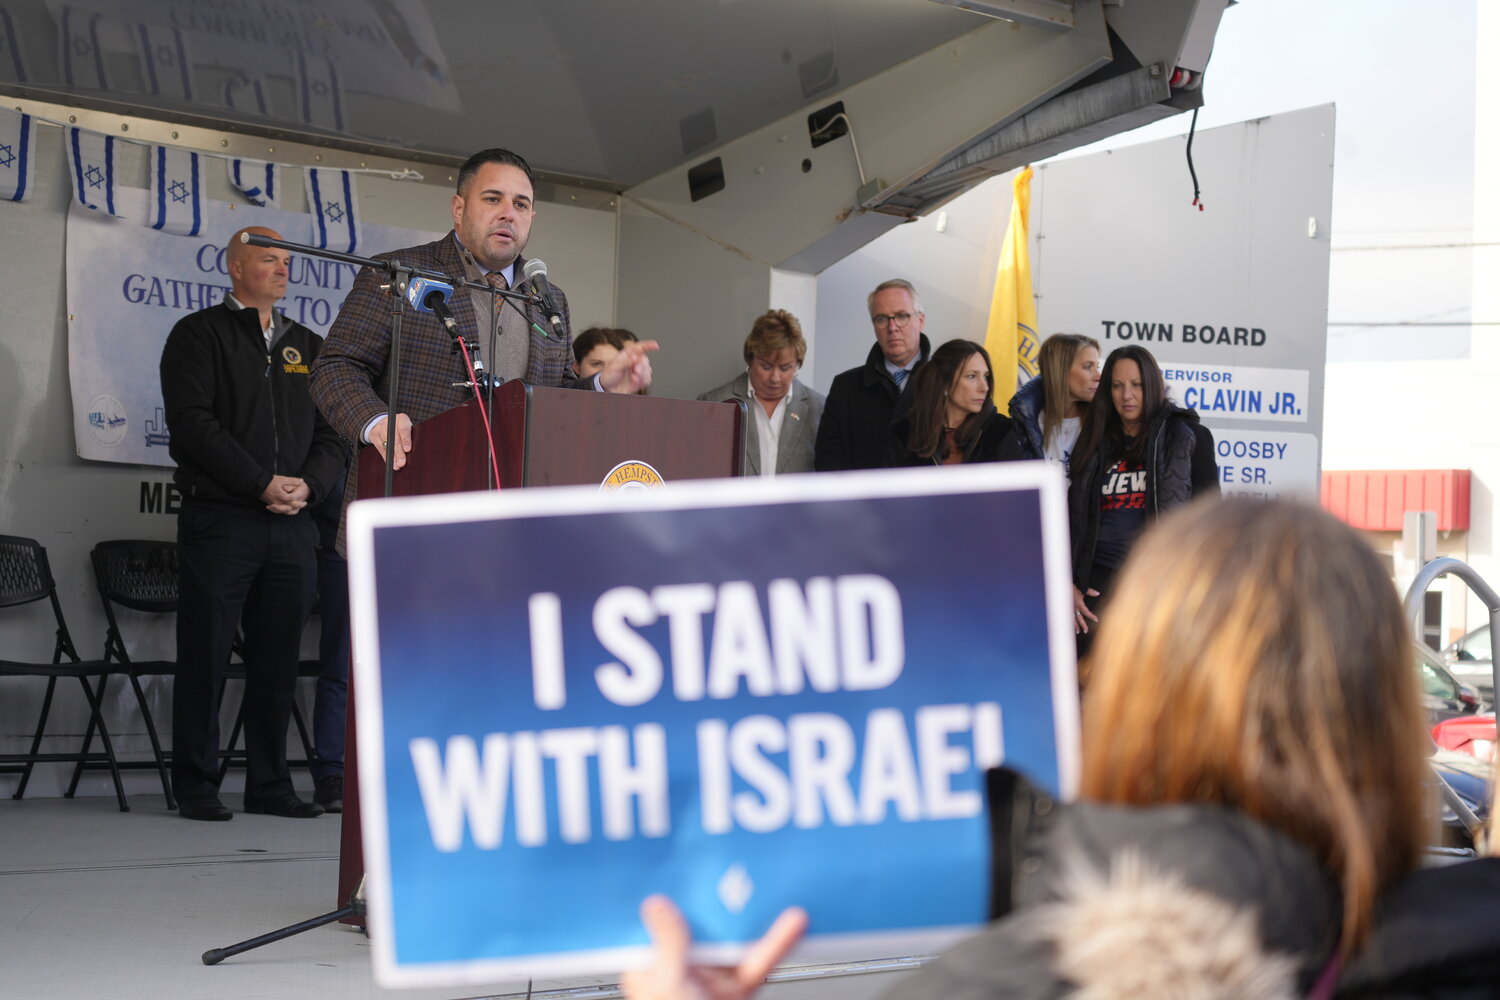 As elected officials like Congressman Anthony D’Esposito took the stage, crowd members raised signs with messages like ‘I stand with Israel.’